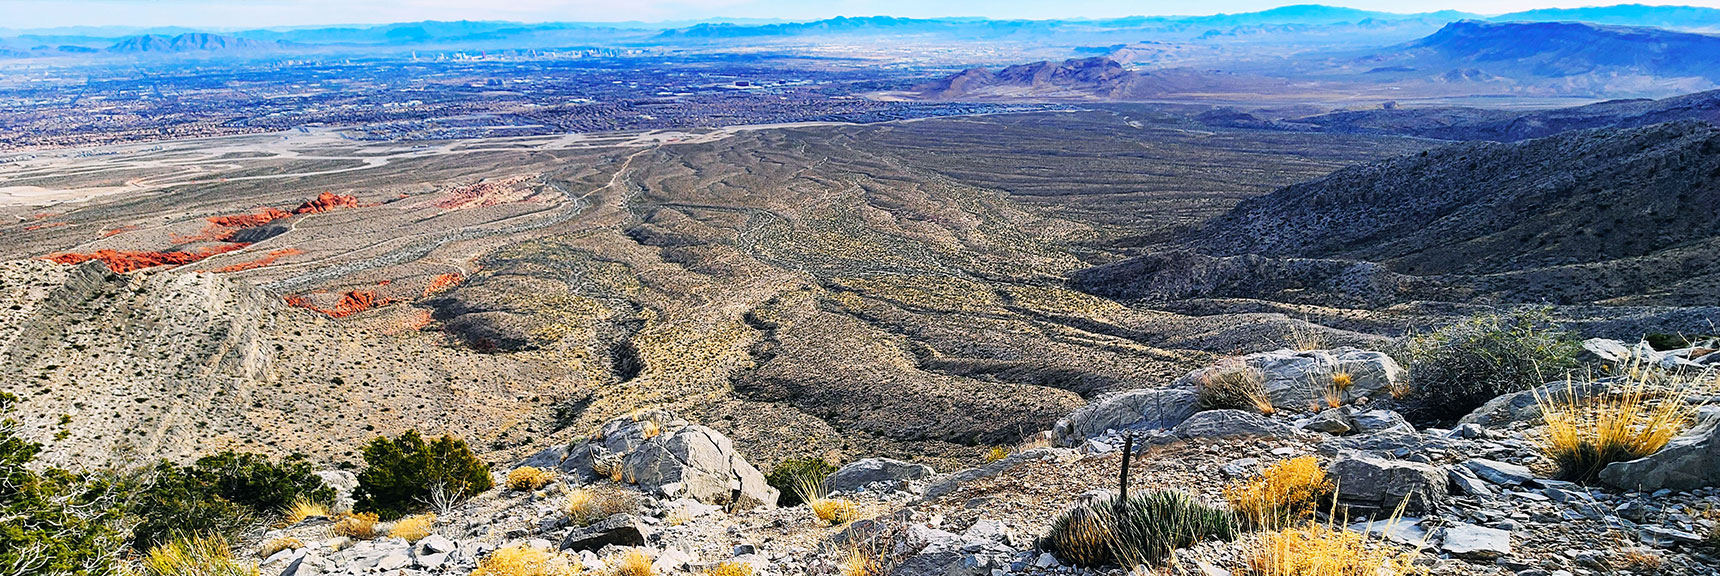 View South Over Ledge. Sheer 500ft+ Cliff Over Edge. | Damsel Peak Southeastern Slope | Calico & Brownstone Basins, Nevada